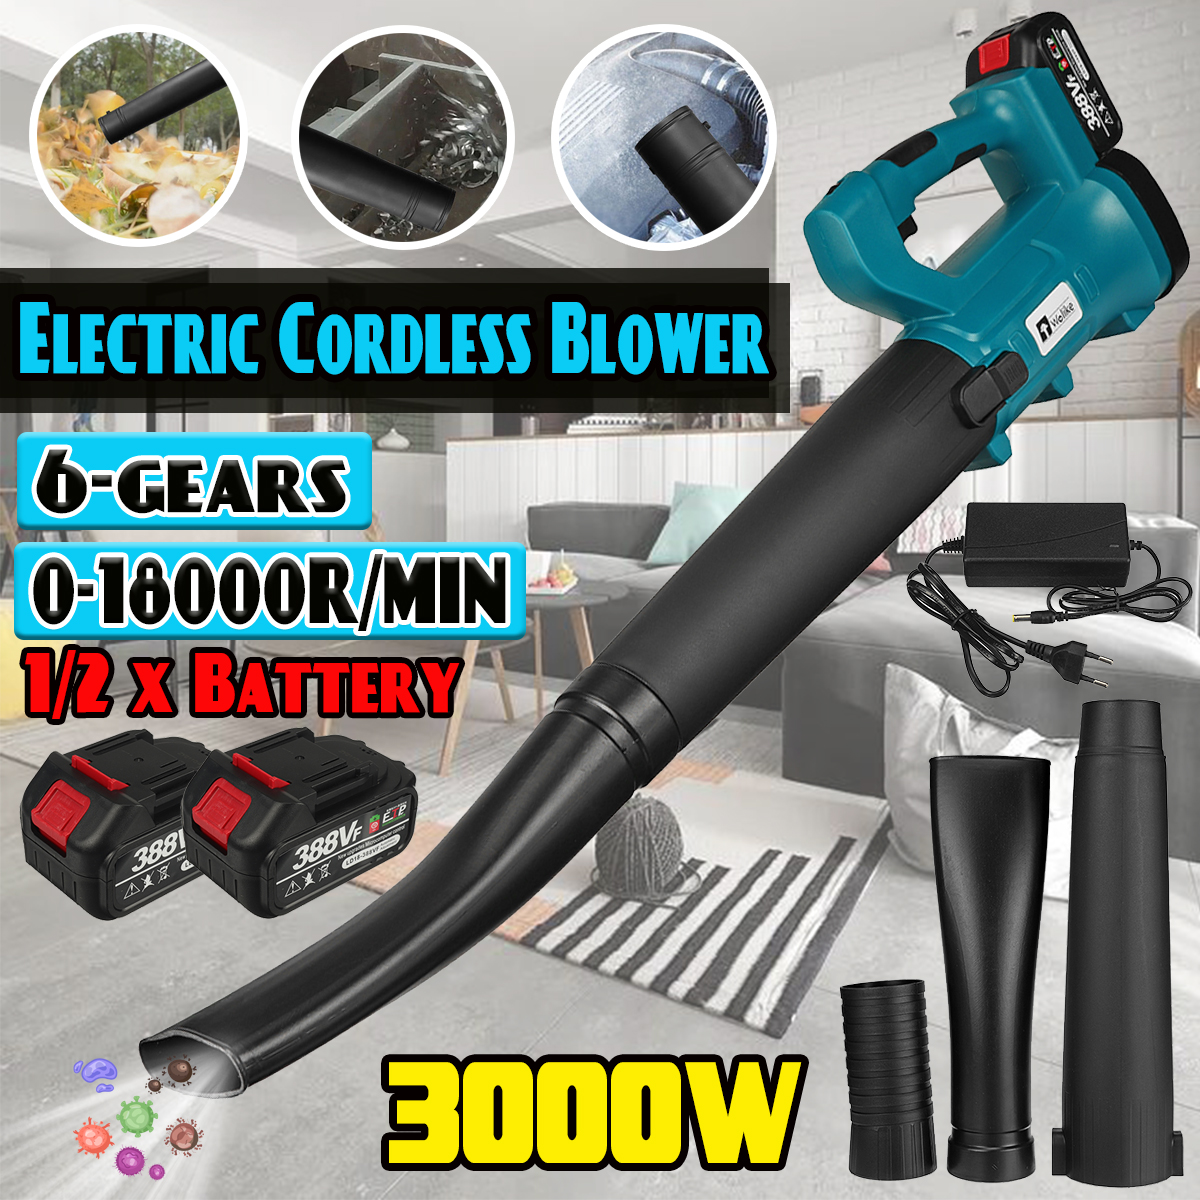 Wolike-388VF-Cordless-Air-Blower-3000W-High-Power-Snow-Blower-Portable-Electric-Rechargeable-Leaf-Bl-1918502-2